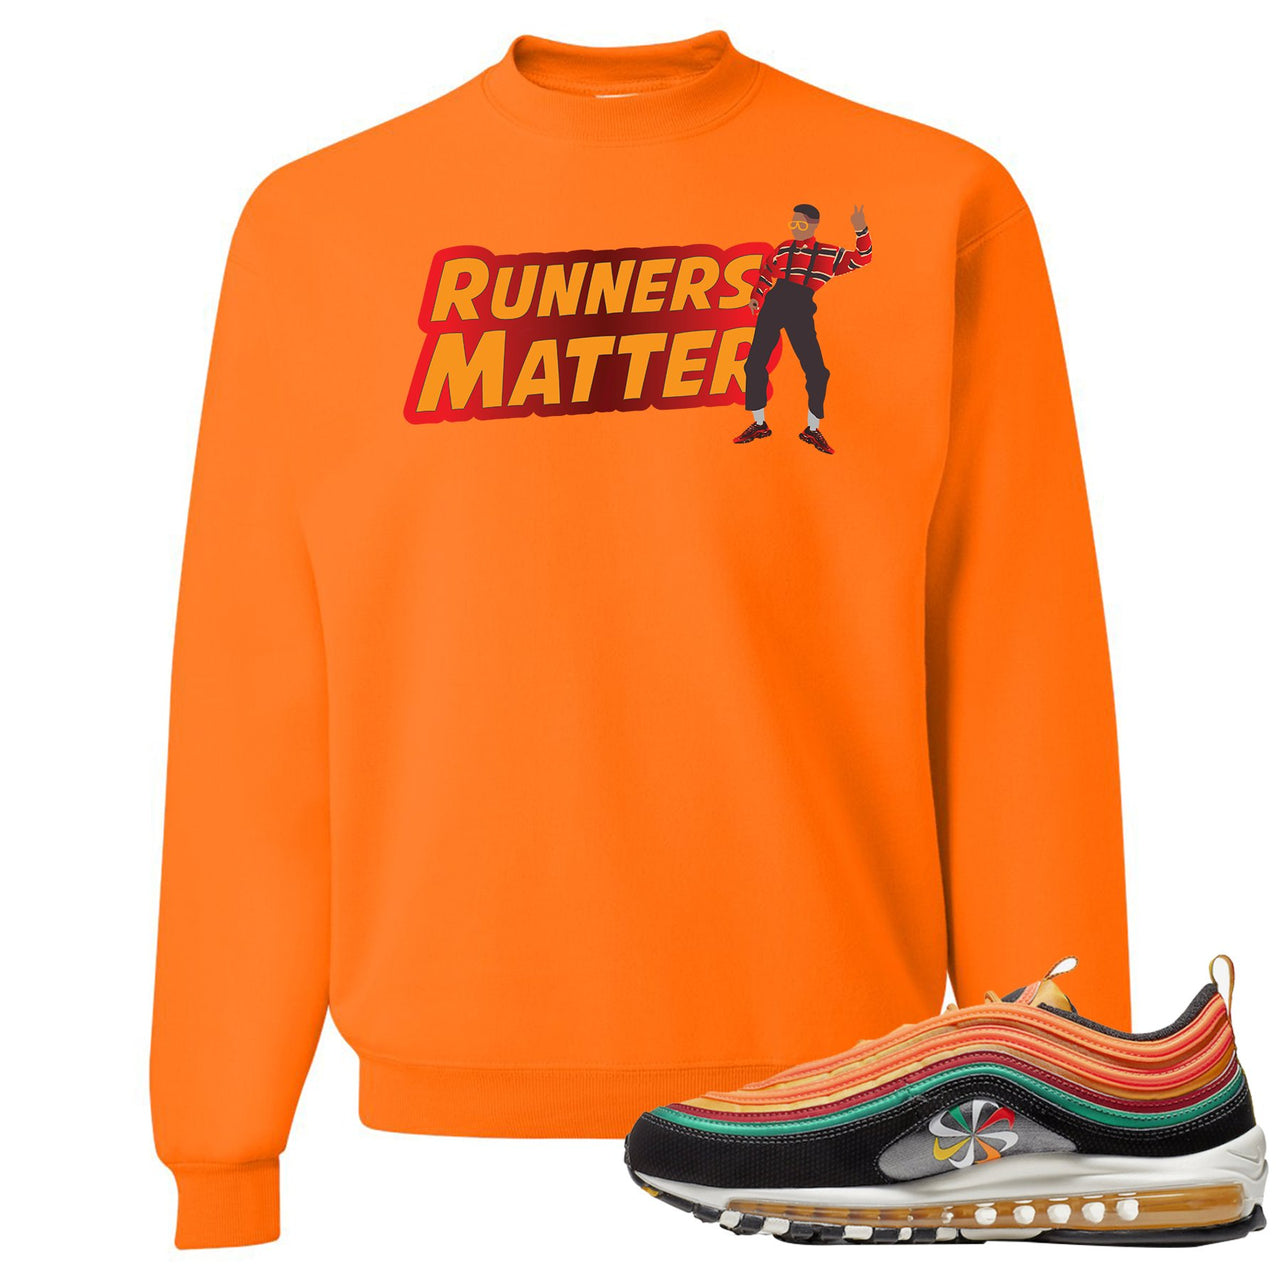 Printed on the front of the Air Max 97 Sunburst safety orange sneaker matching crewneck sweatshirt is the runners matter logo